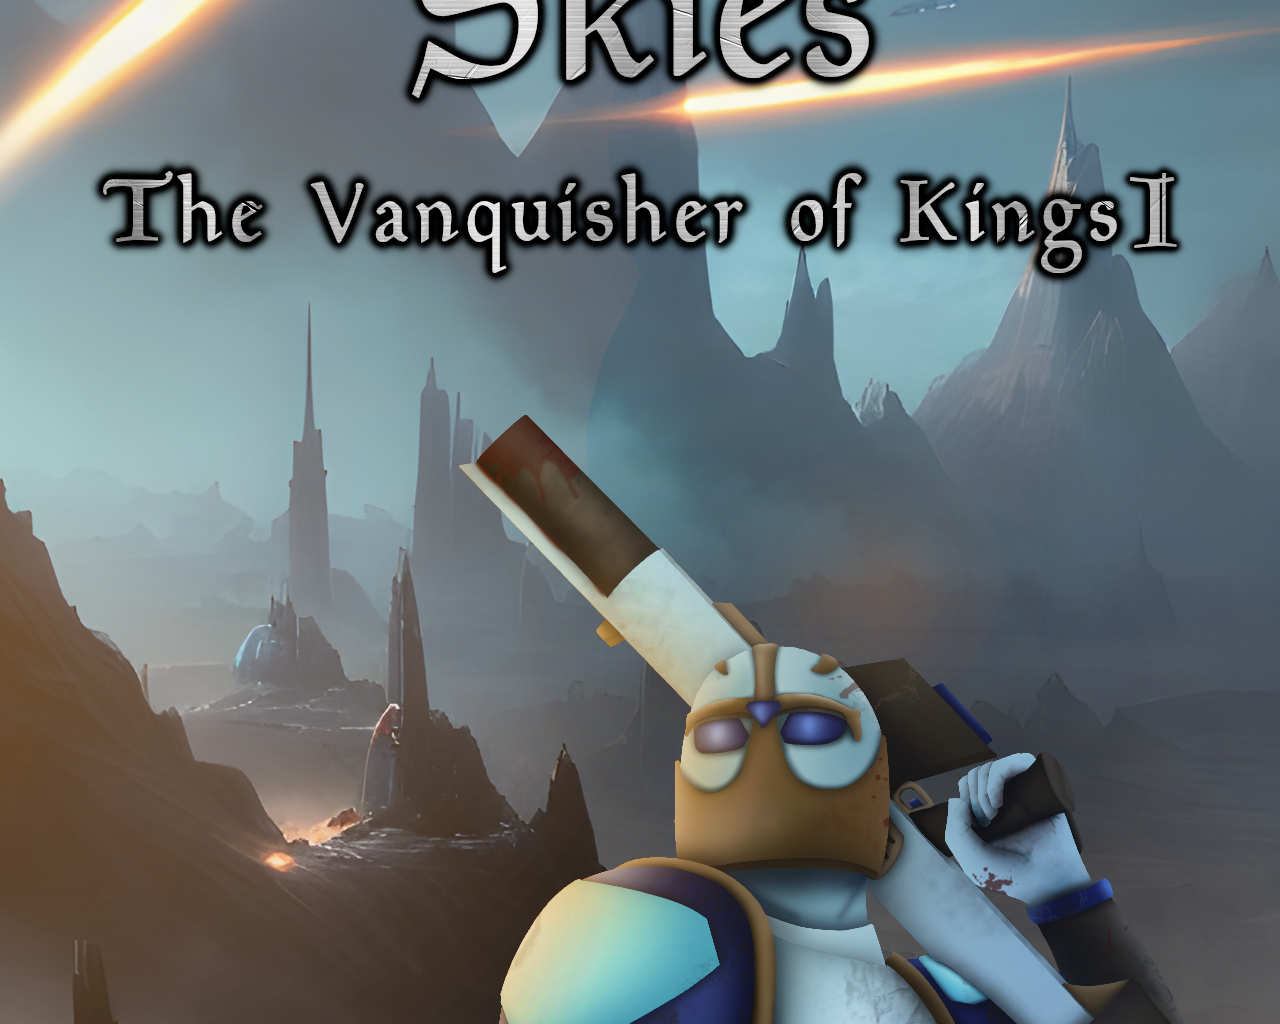 Poster Image for Bloodstained Skies: The Vanquisher of Kings I